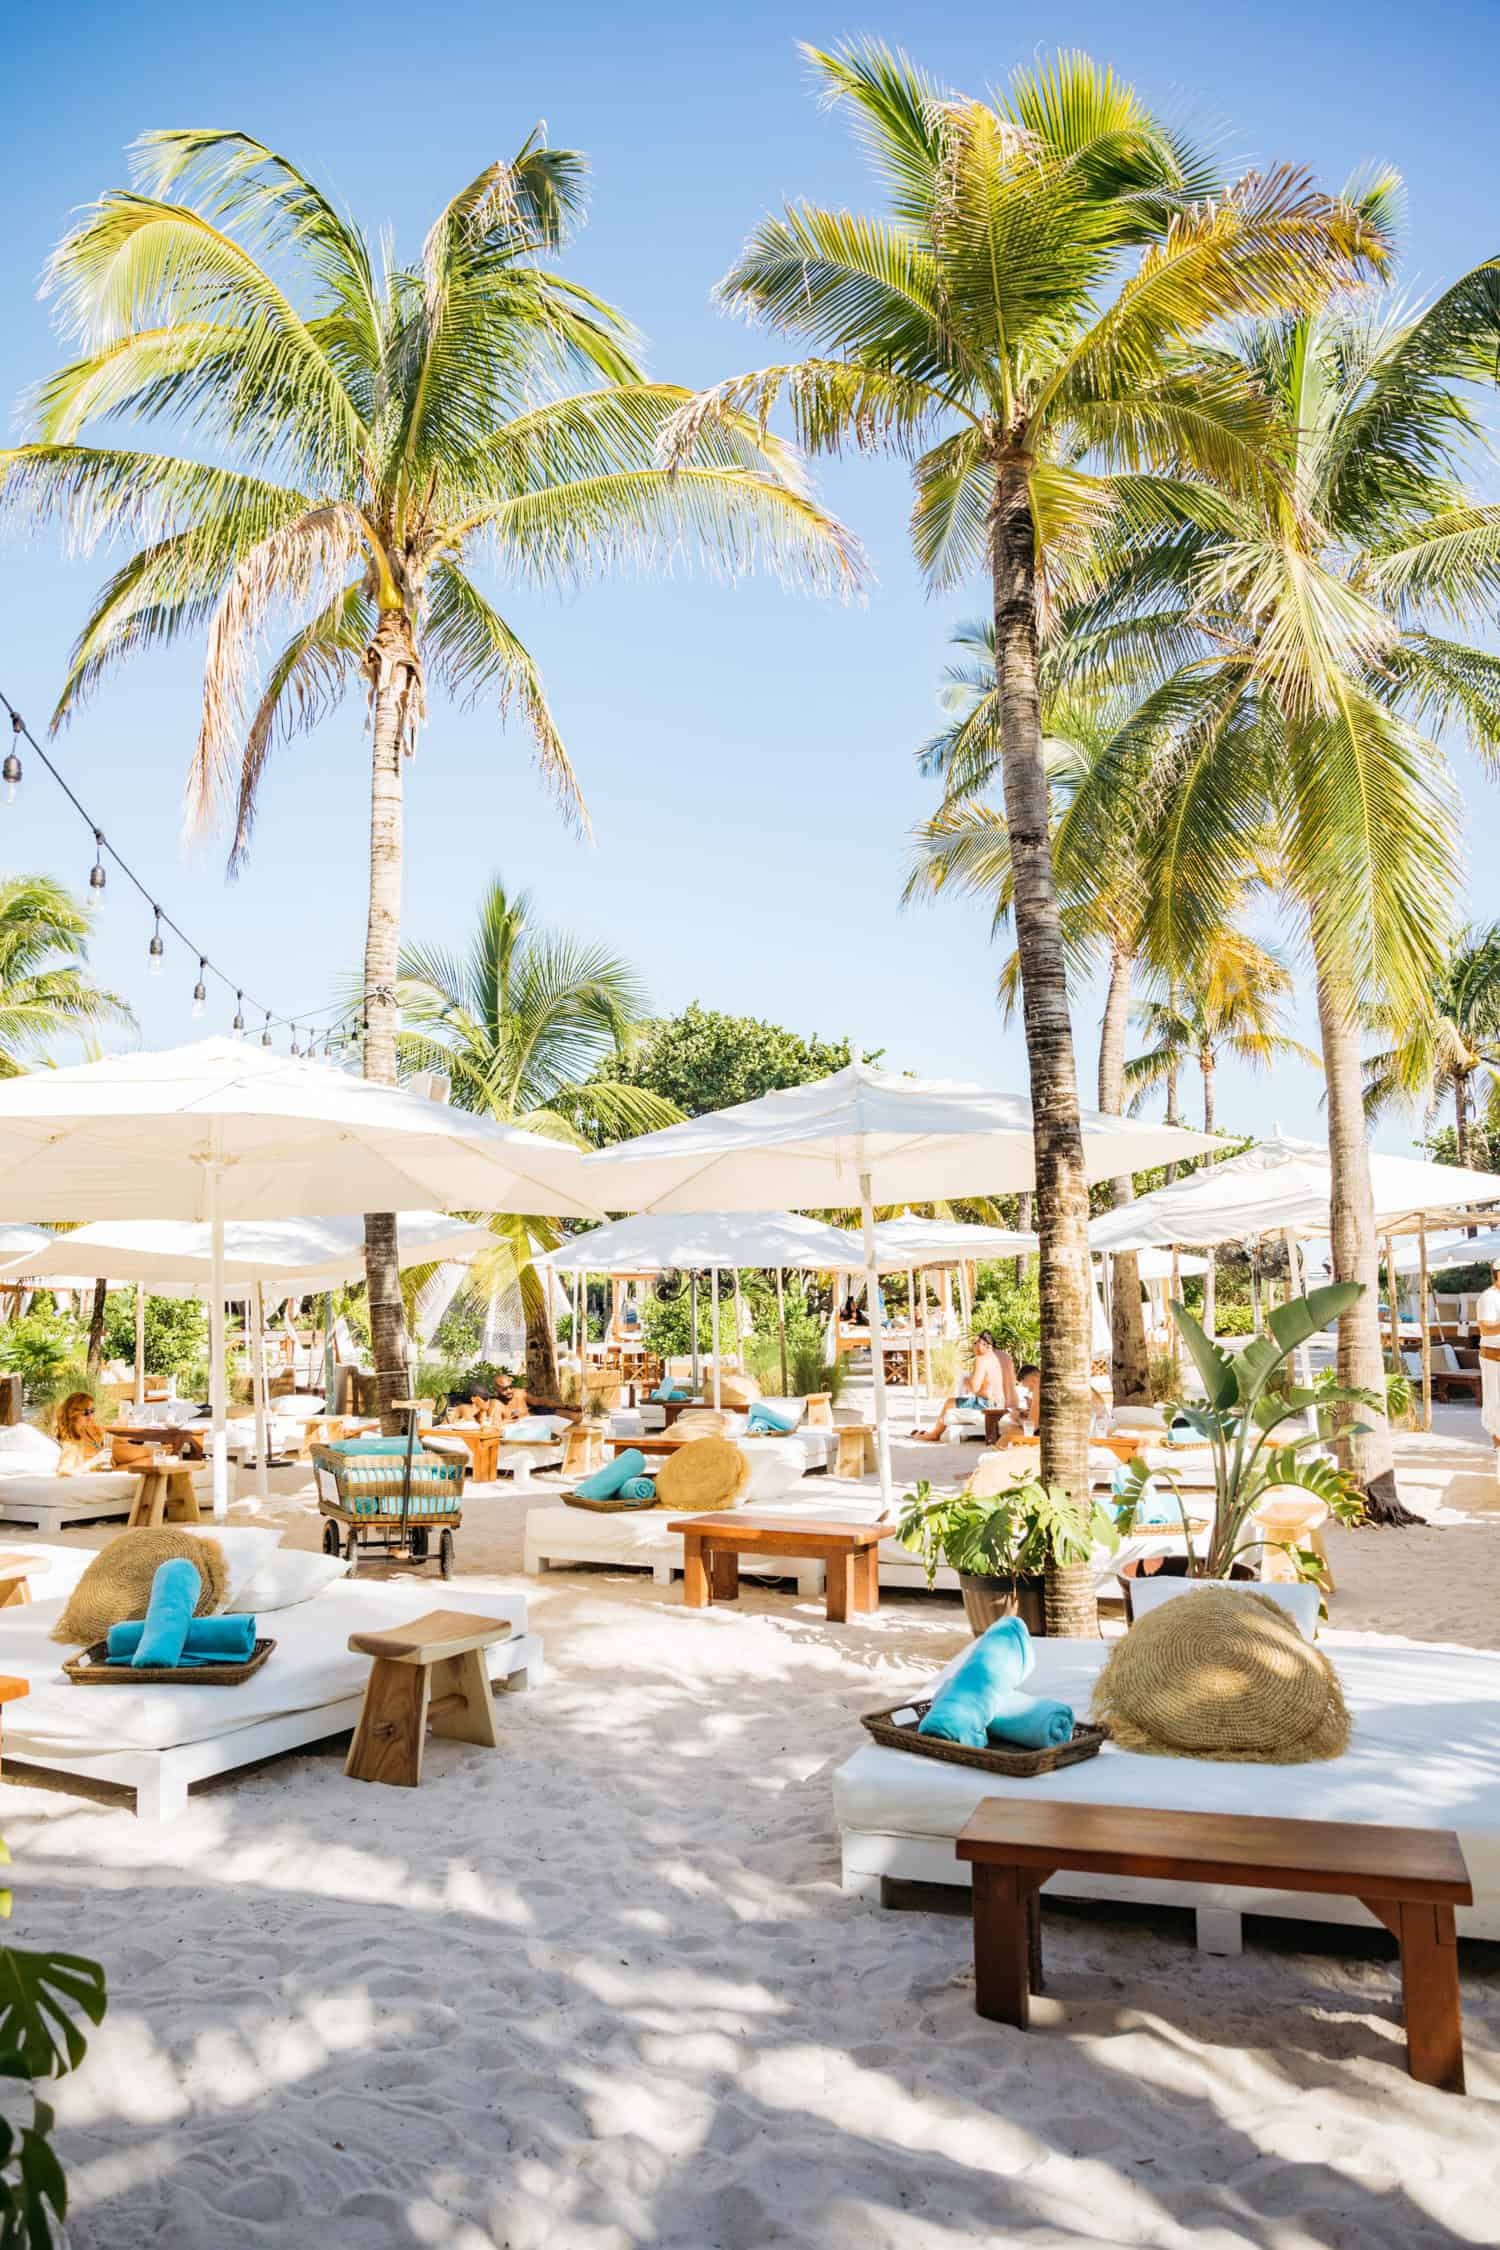 What Are You Waiting For? Nikki Beach Miami Beach Is The Place To Be!